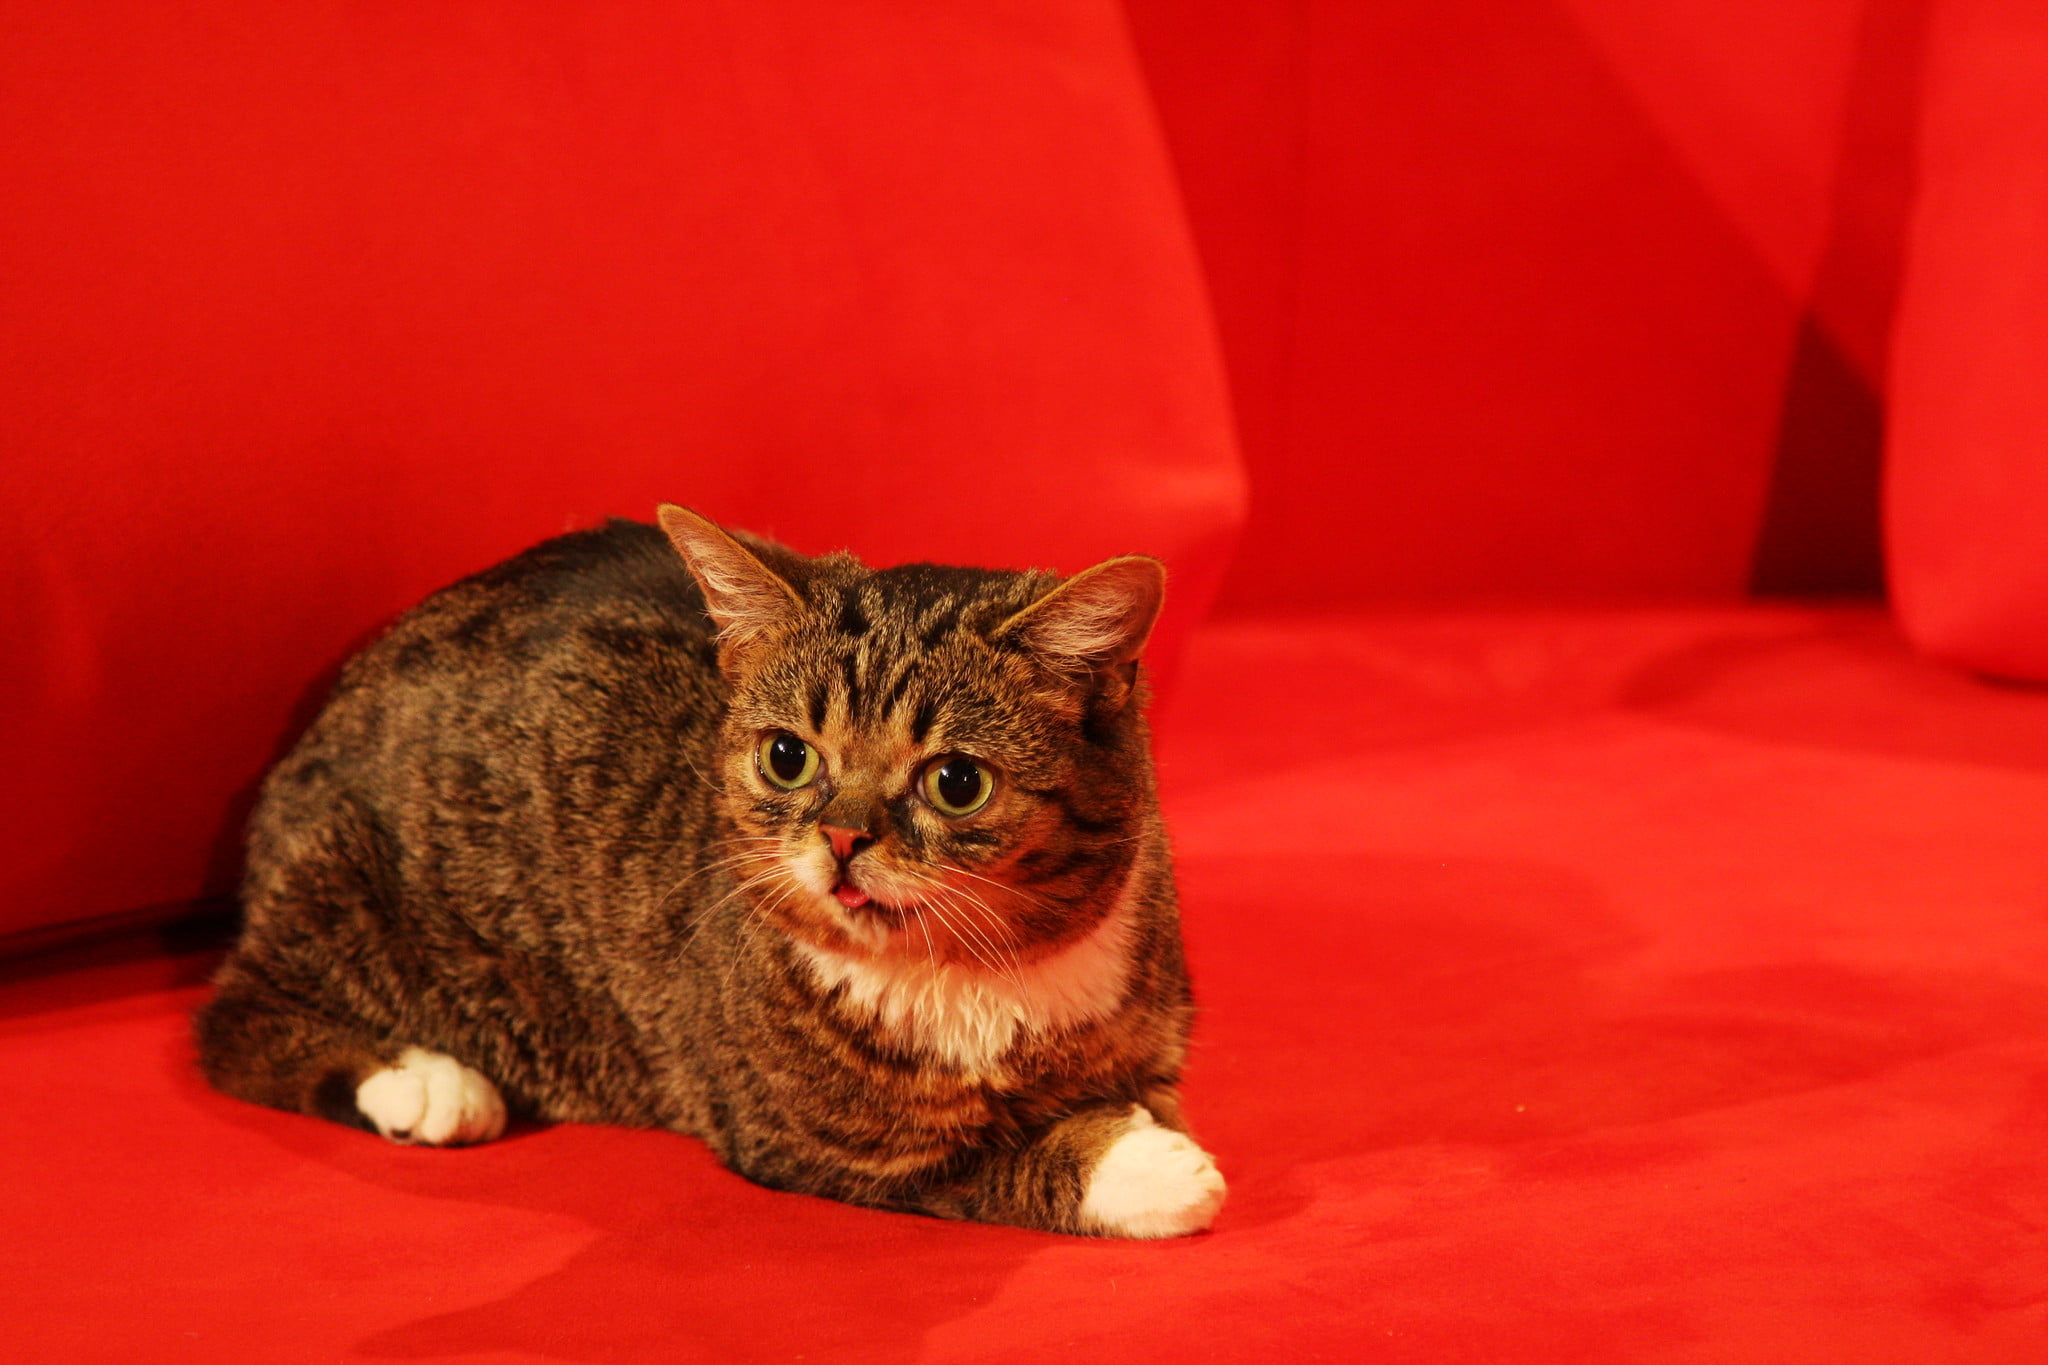 Lil Bub, officially Lil BUB, was an American celebrity cat known for her unique physical appearance. Her photos were first posted to Tumblr in November 2011, before being taken off after being featured on the social news website Reddit.